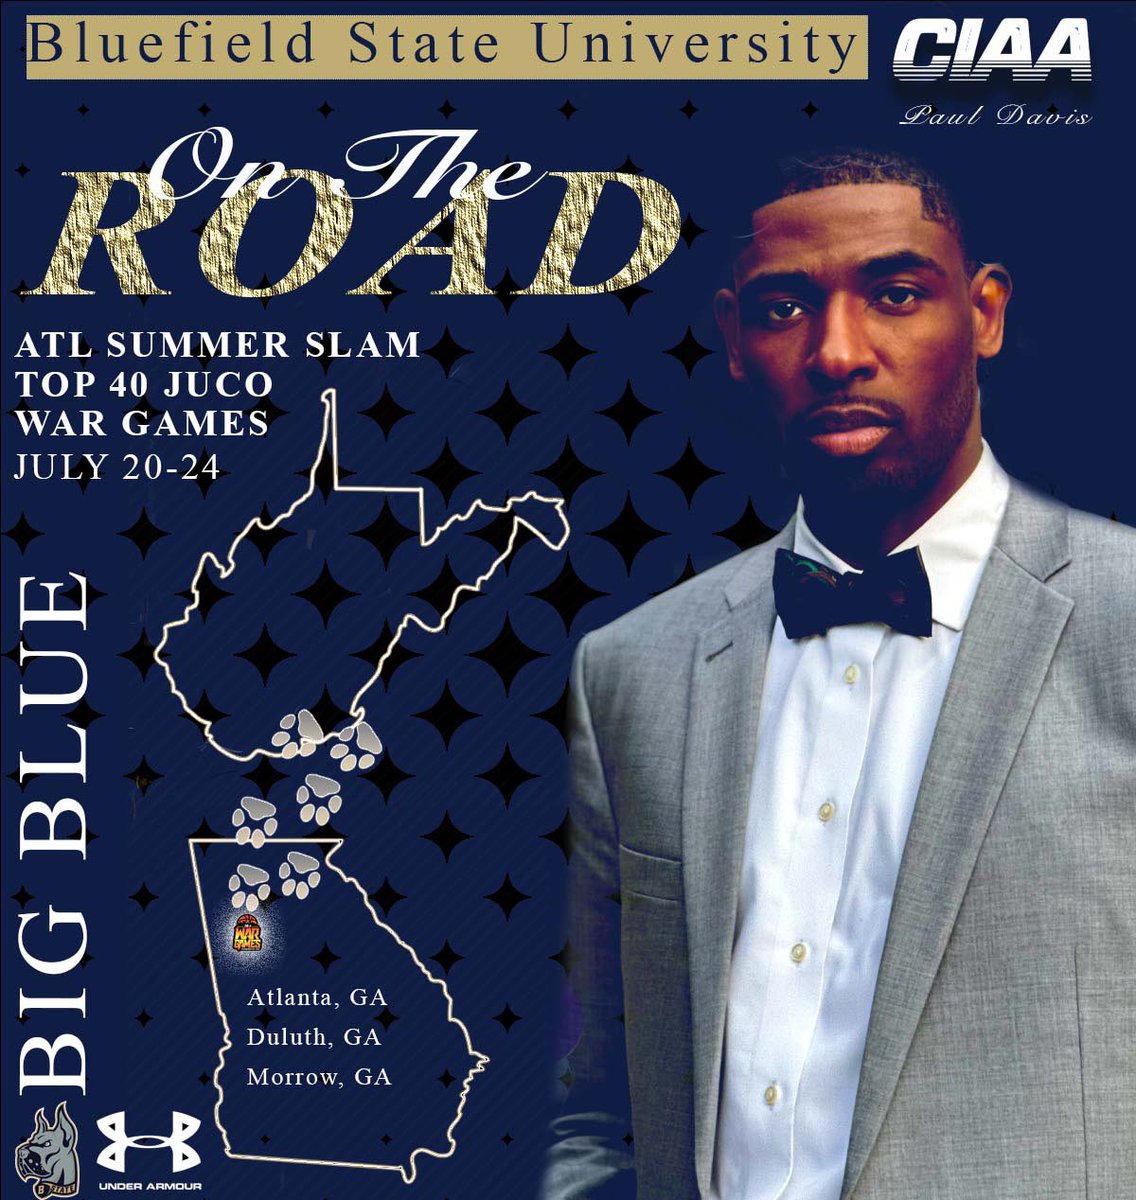 Atlanta, GA what’s up? I’m back outside, bringing you my bow tie and game face! Looking for some future Lady Big Blue! If you’re a great teammate, can shoot, rebound, defend and you’re coachable, drop those schedules! #guardthehill #ciaa #retweet #family